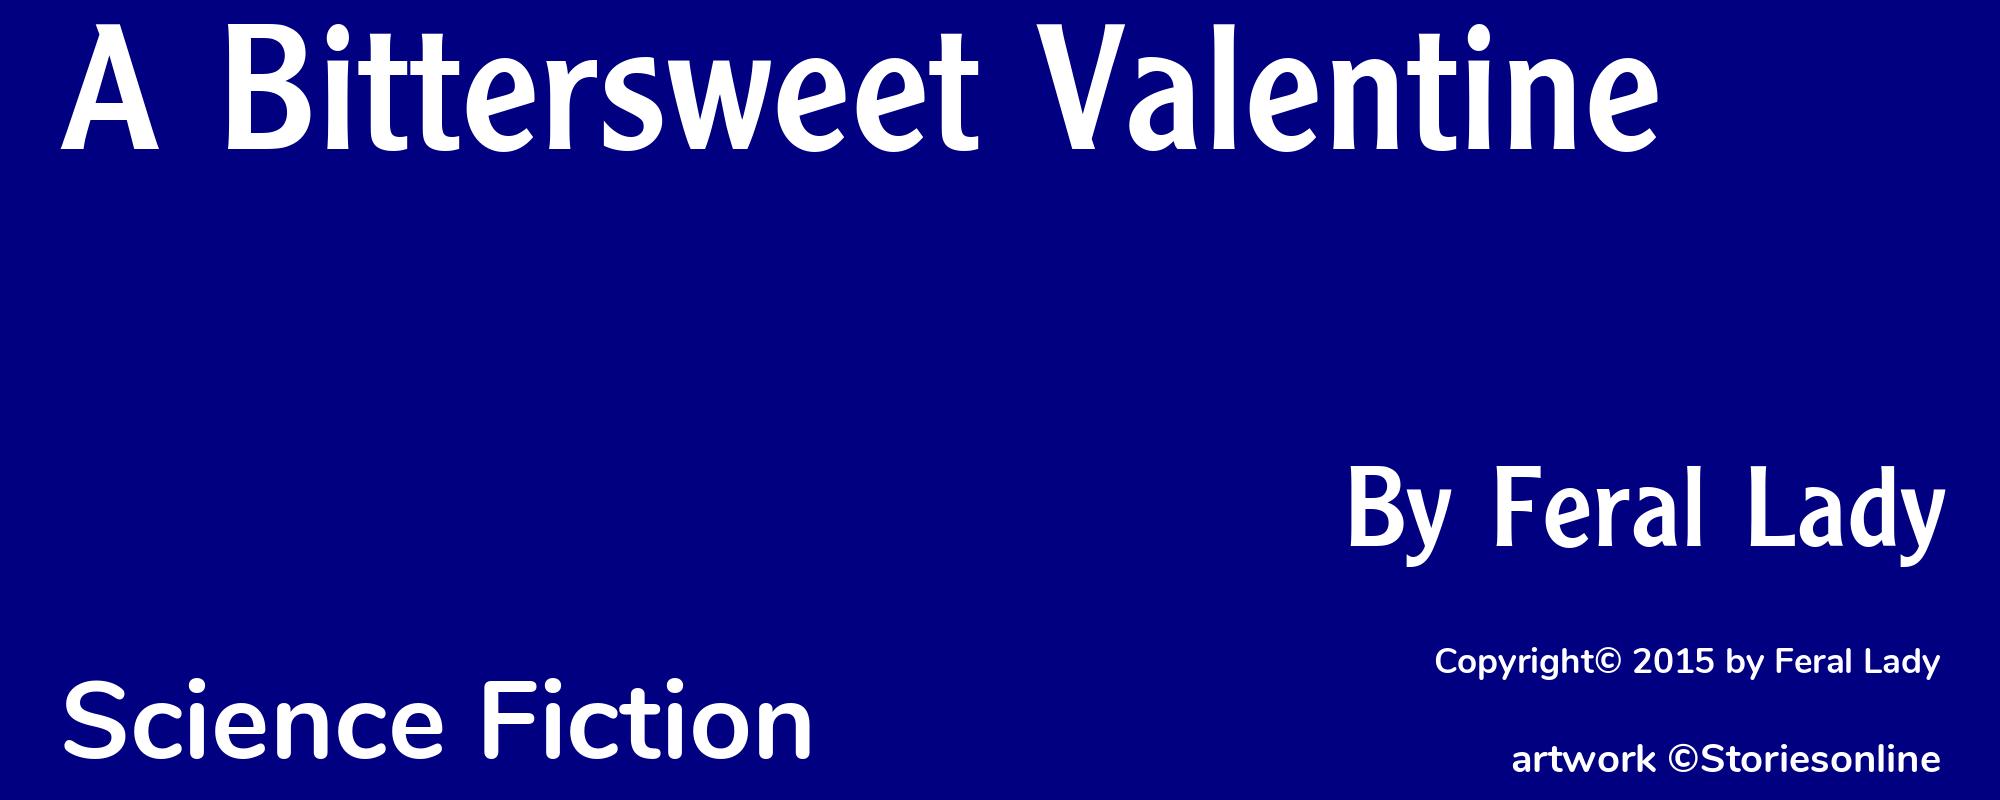 A Bittersweet Valentine - Cover